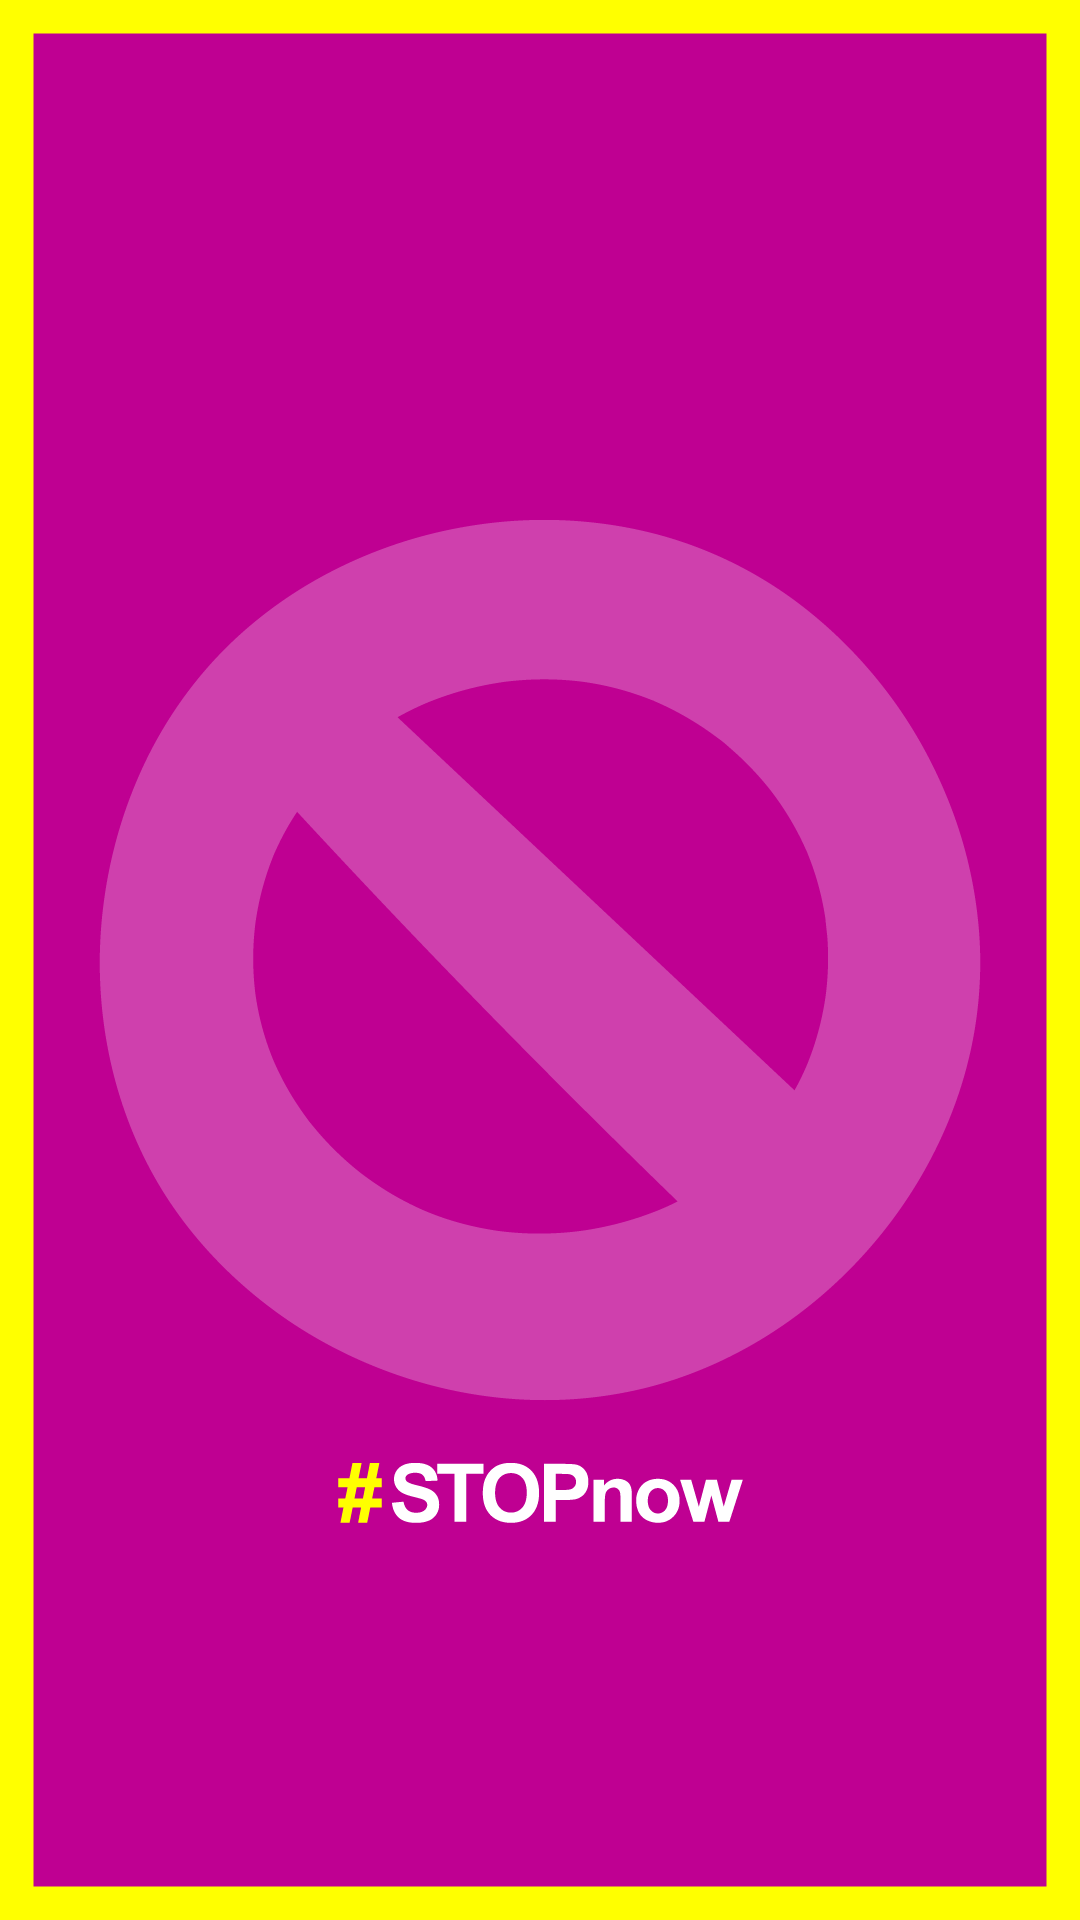 STOP now! logo in English without text.